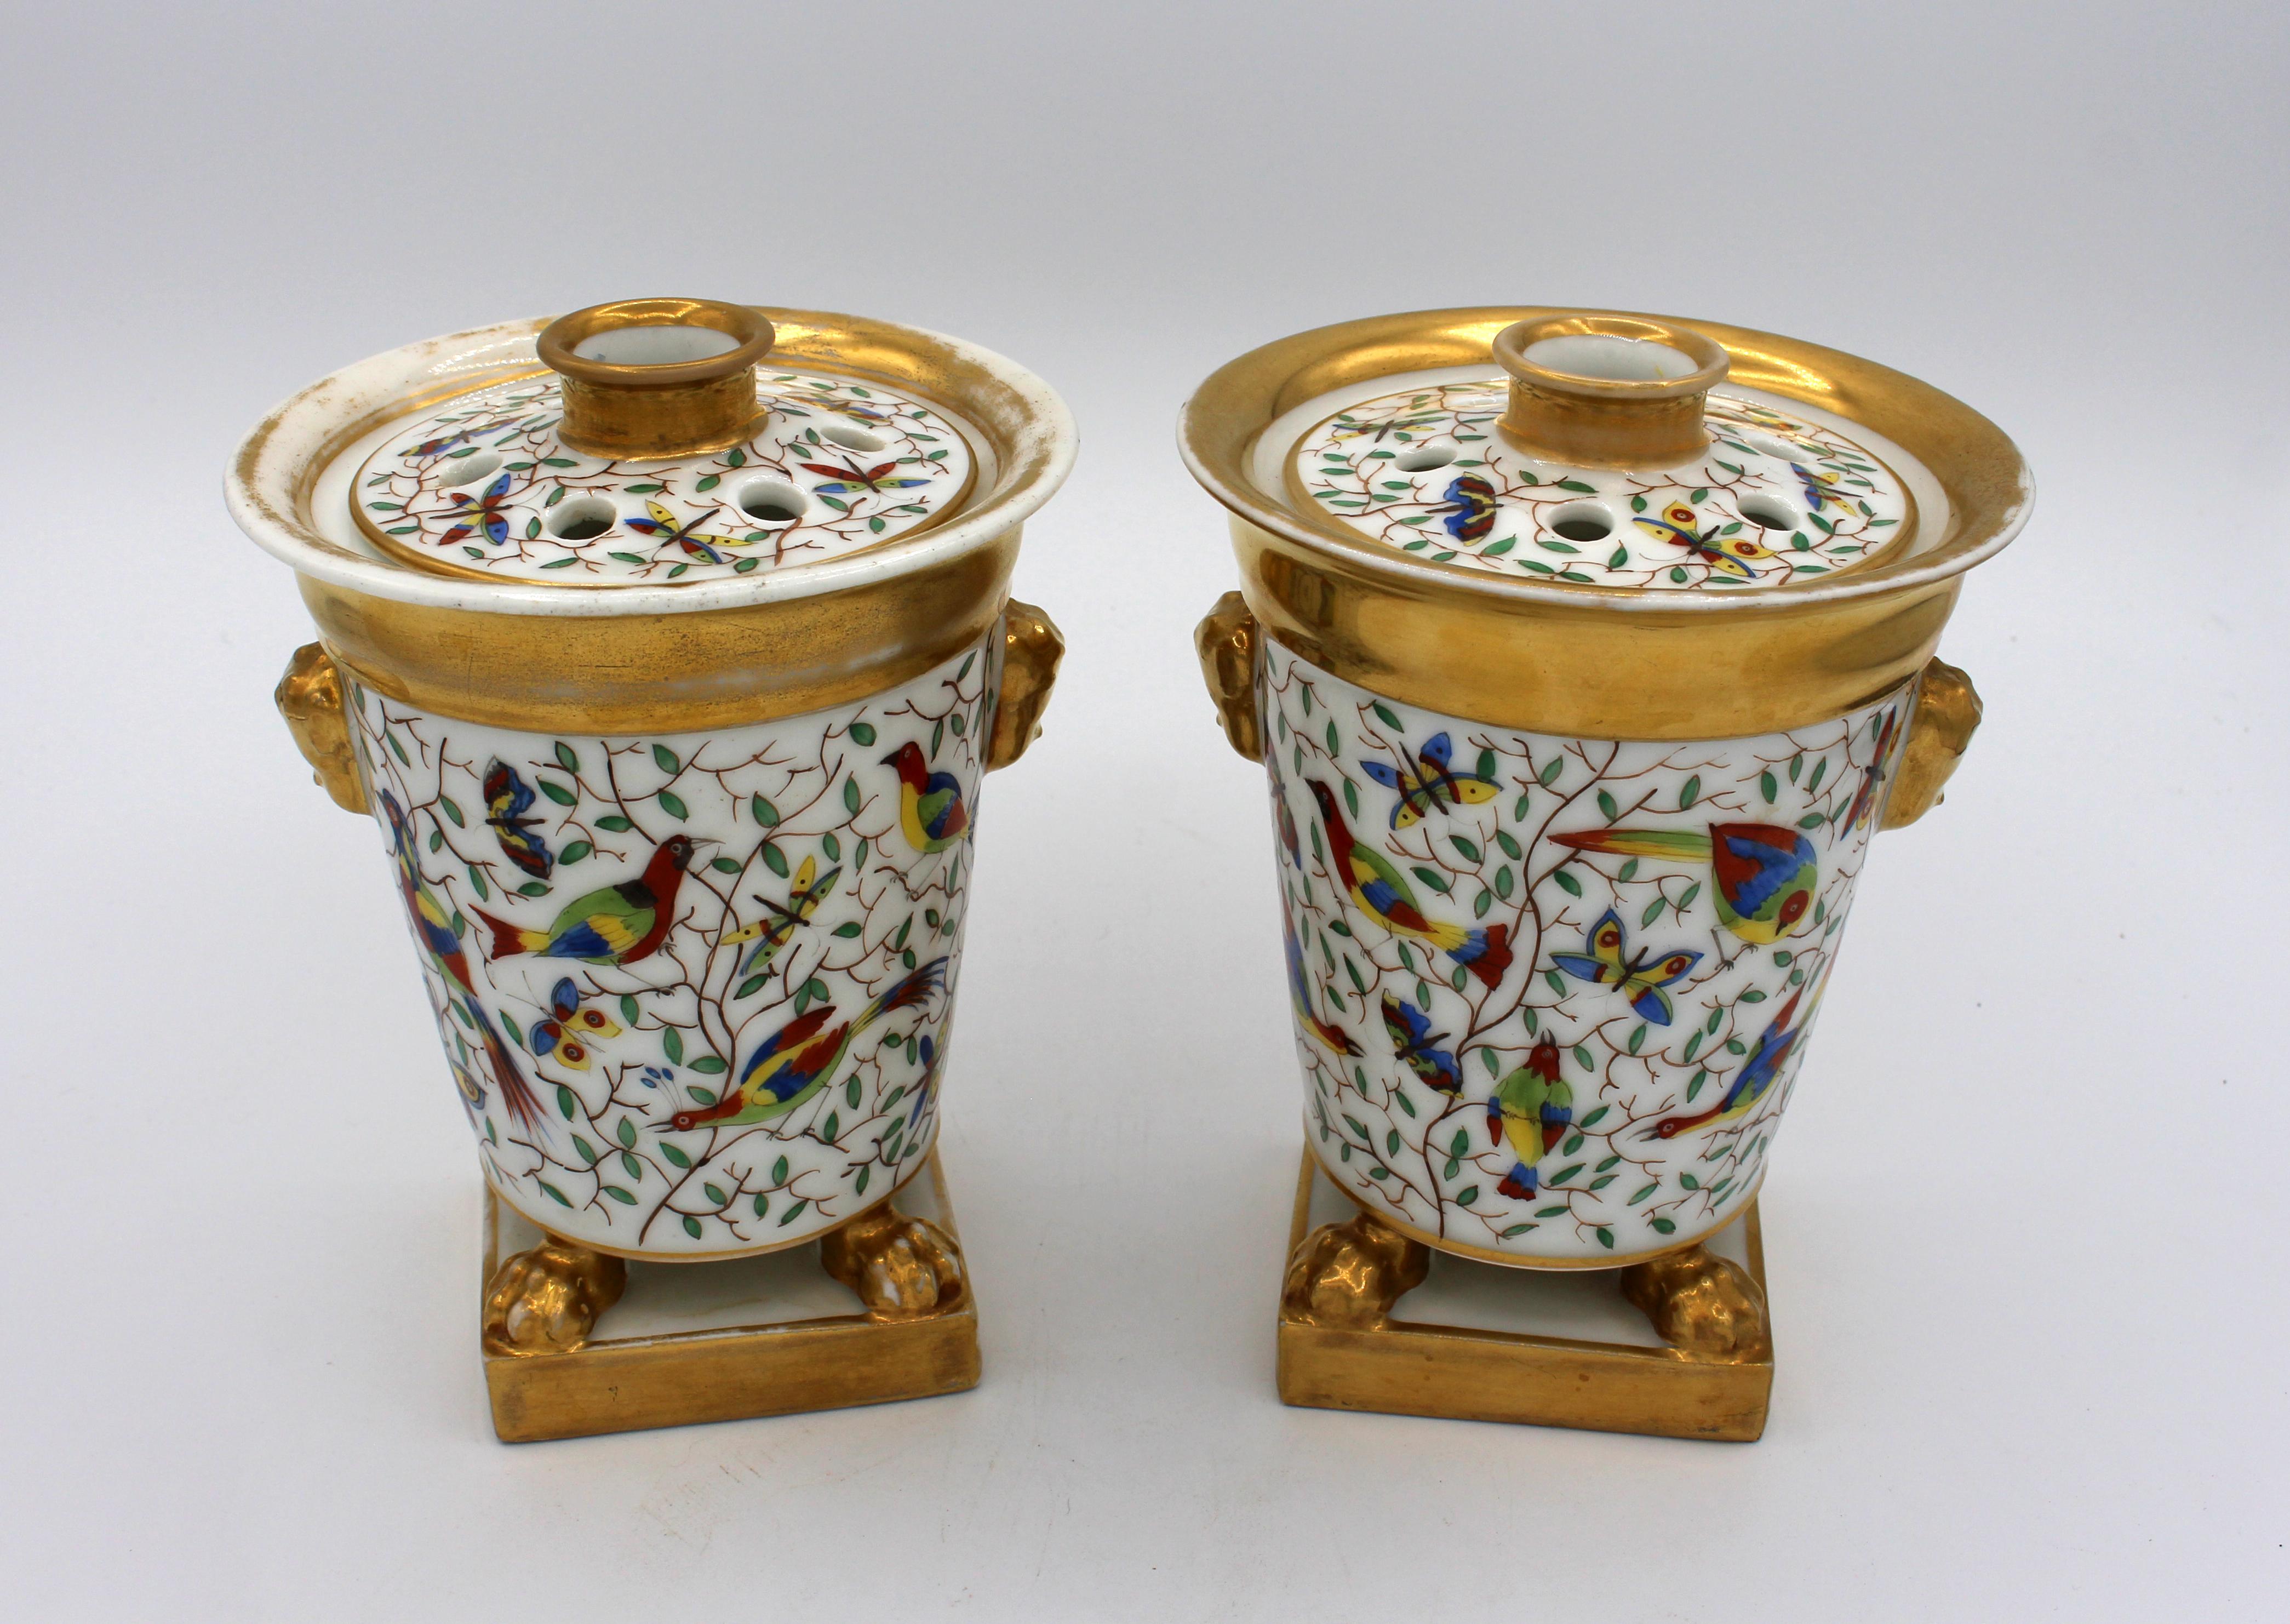 A mid-19th century pair of bough pots (often called potpourri urns). French. Old Paris porcelain. Trailing vines filled with colorful birds and butterflies. Burnished gold lion masks, feet, and bandings. One inner rime of cover has a loss. Unmarked.